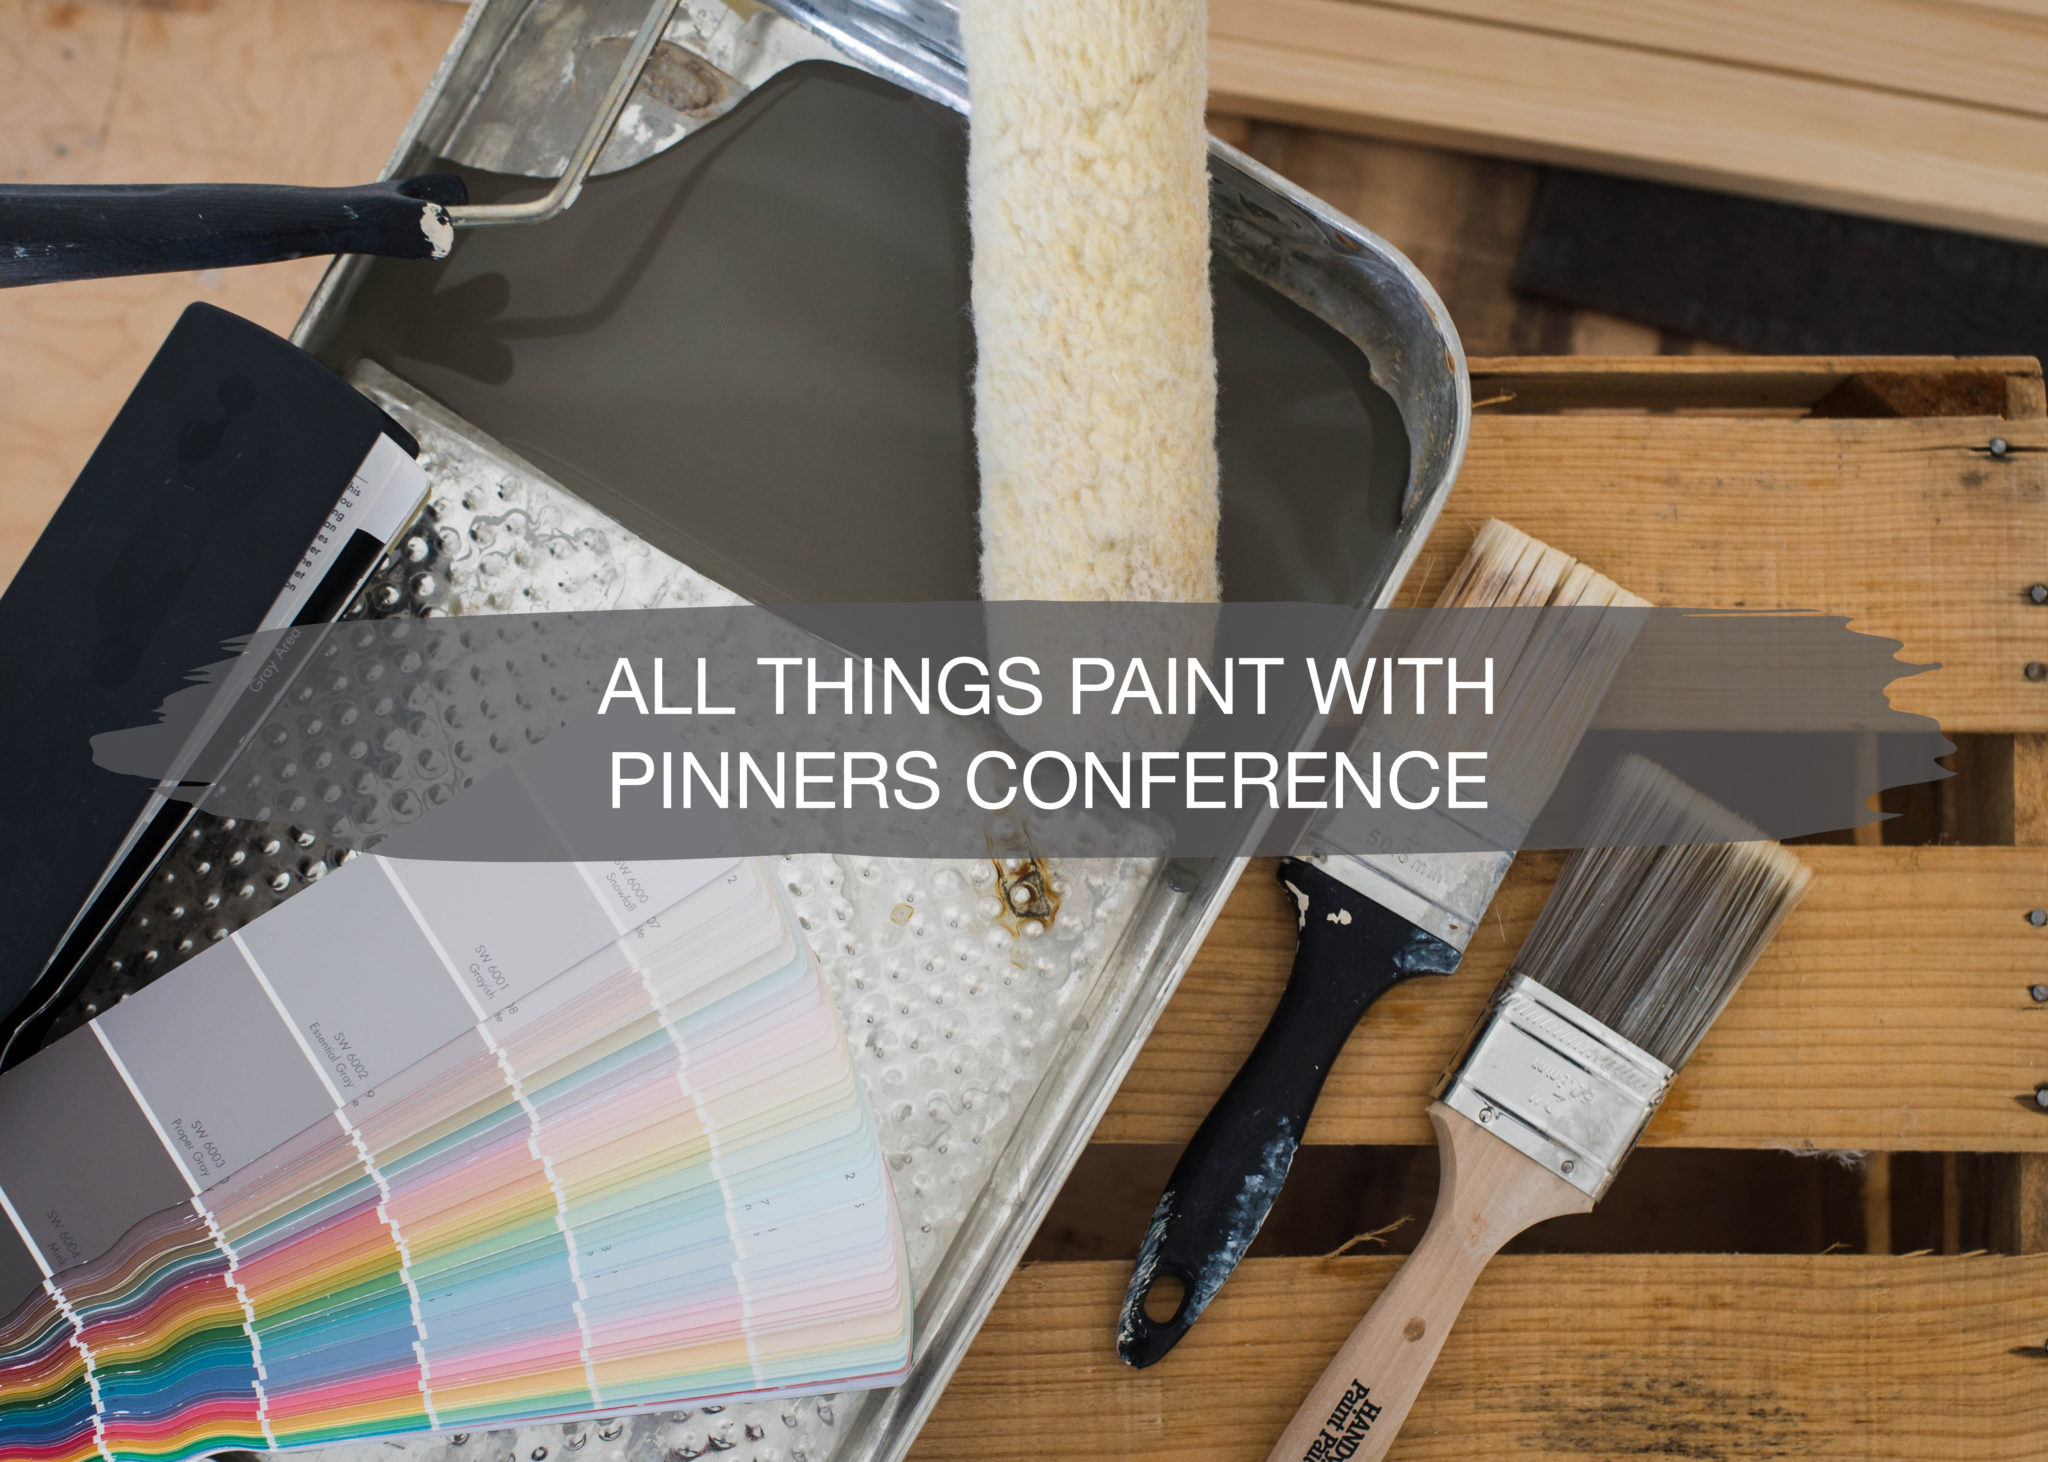 All Things Paint with Pinner's Conference